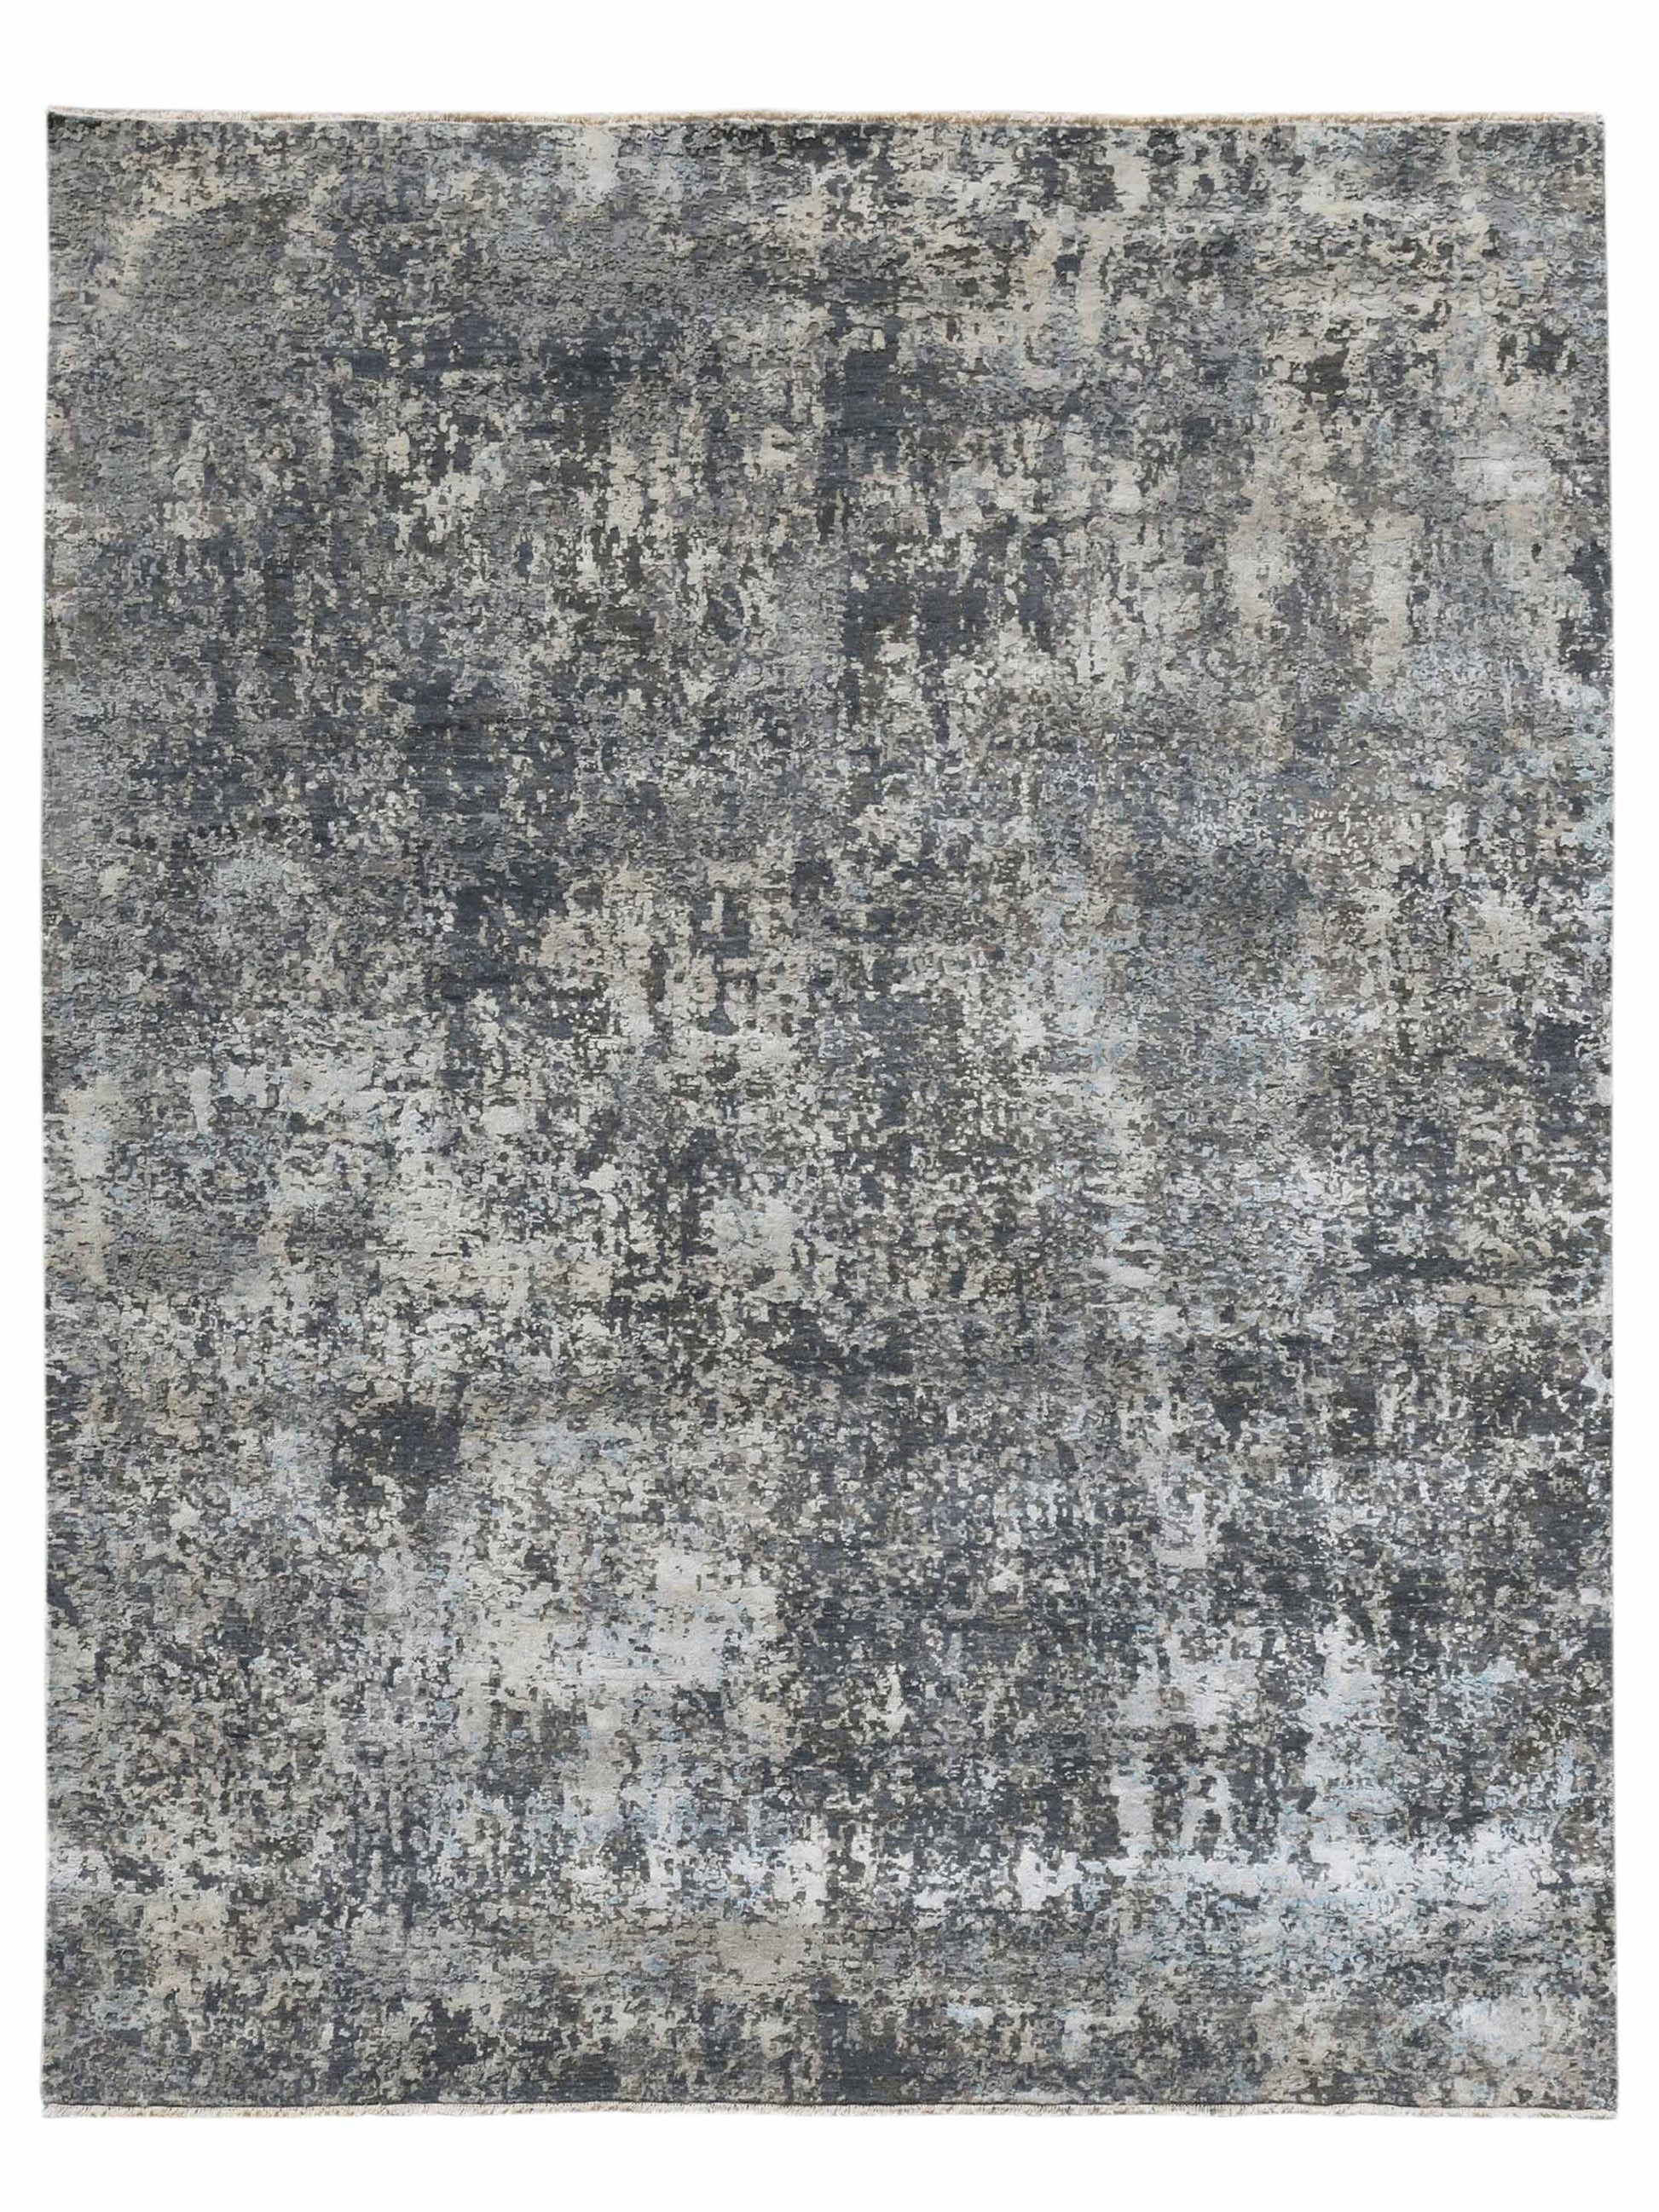 Limited Zelma WI-401 CAPE COD Transitional Knotted Rug